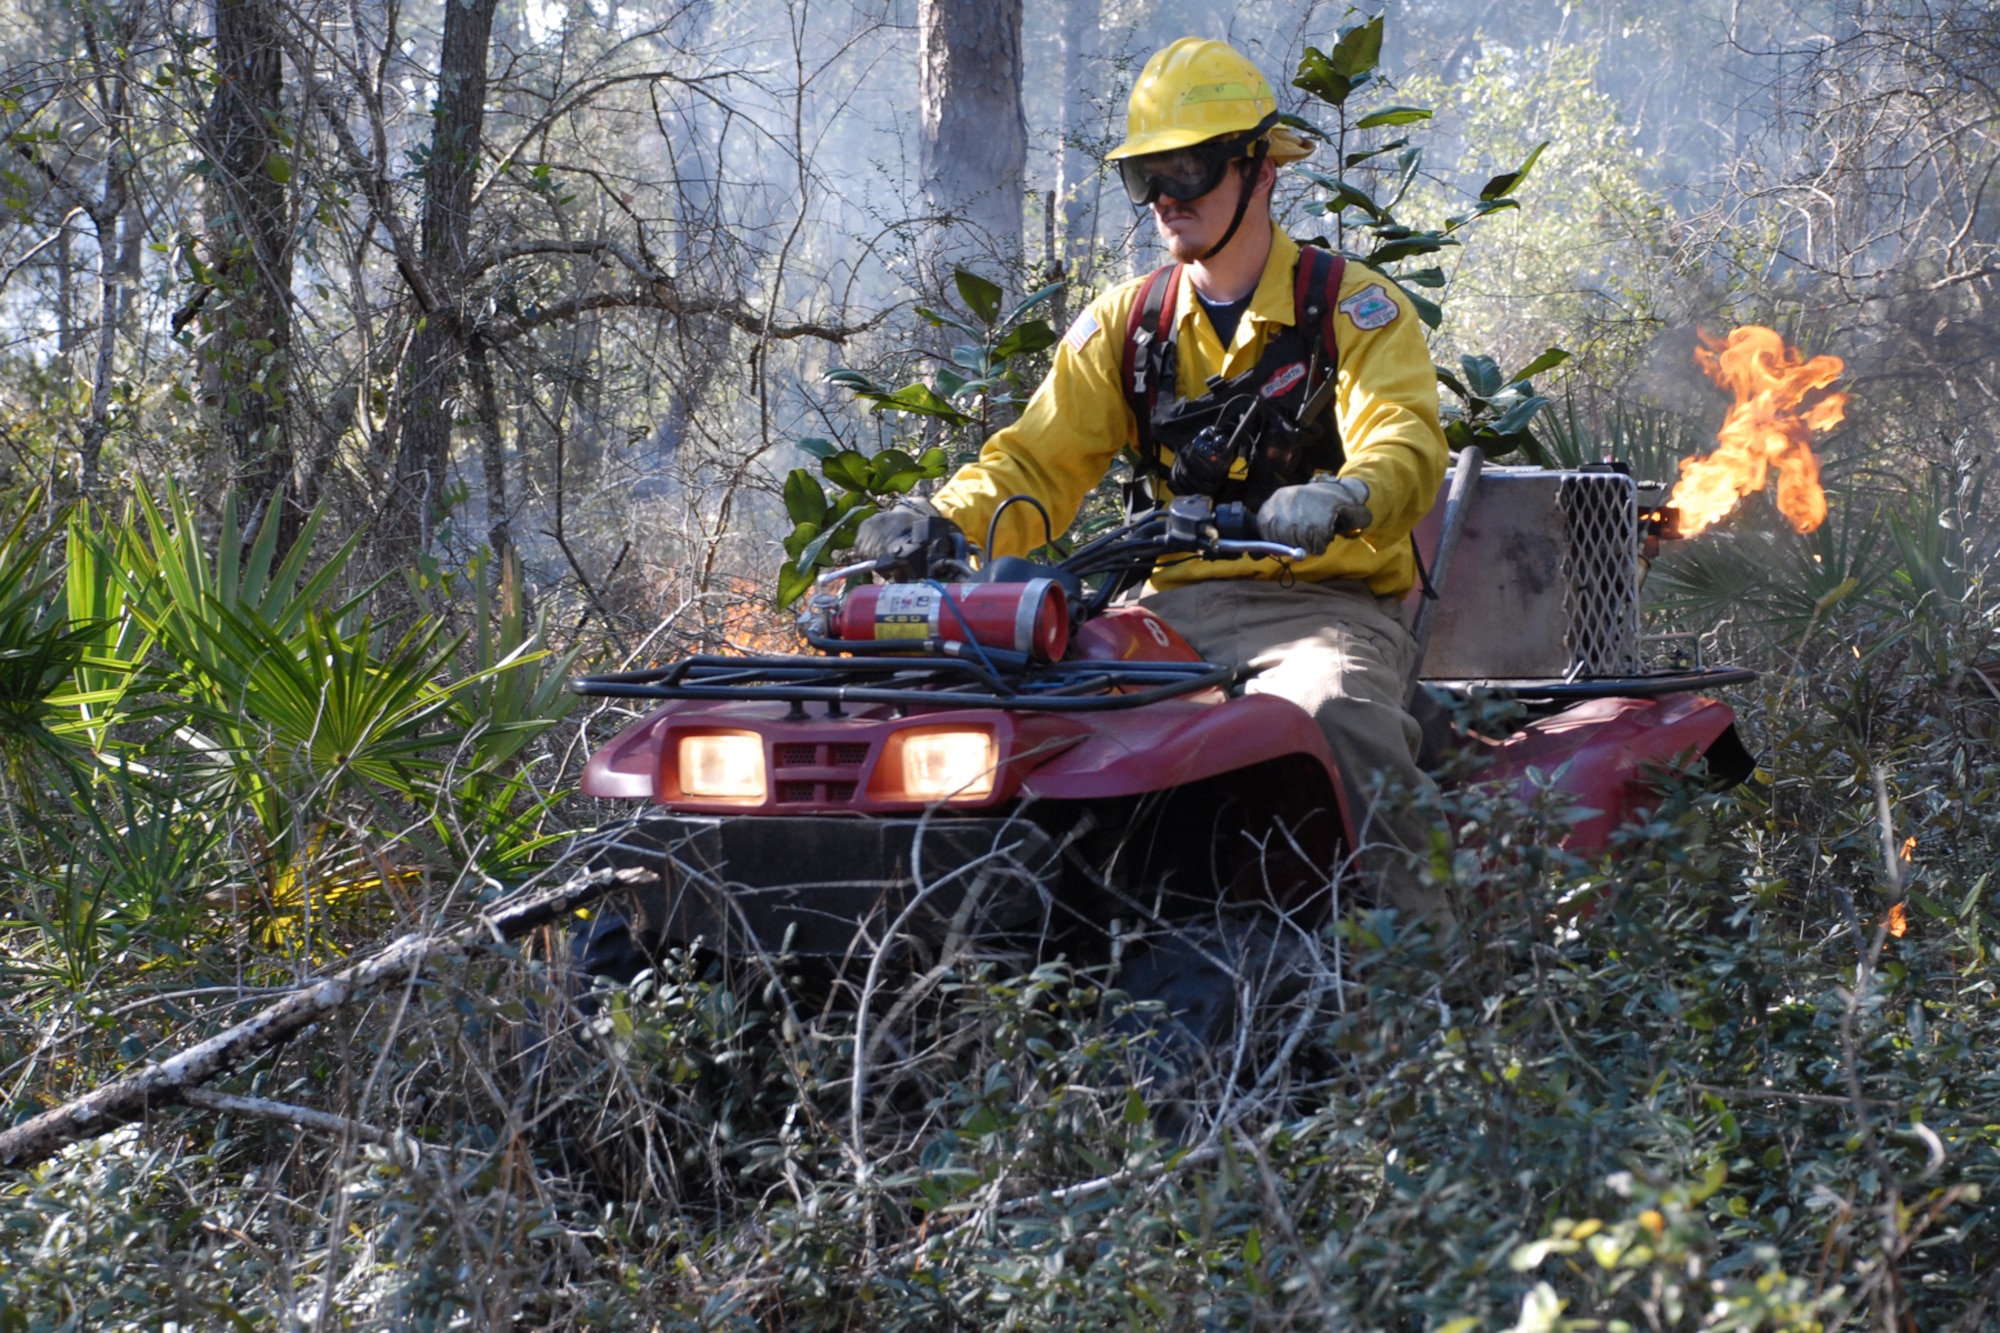 EGLIN AIR FORCE BASE, Fla. ? Ryan Campbell, a Jackson Guard forestry technician and wildland fire specialist, navigates an all-terrain vehicle through a wooded area dragging a fire drip line in his path to start a prescribed burn at White Point, an 85-acre recreation area on the Choctawhatchee Bay Jan. 29. Many native plants and animal species depend on Eglin?s fire-dependent long-leaf pine ecosystem, 11 of which are federally protected. Endangered species such as the red-cockaded woodpecker, depend on fire that is typically caused by either lightning strikes or Eglin's resident fire managers to survive. As of the 2008 control burn season, Jackson Guard?s five-year average is 73,000 acres burned annually. (U.S. Air Force Photo by Staff Sgt. Mike Meares)